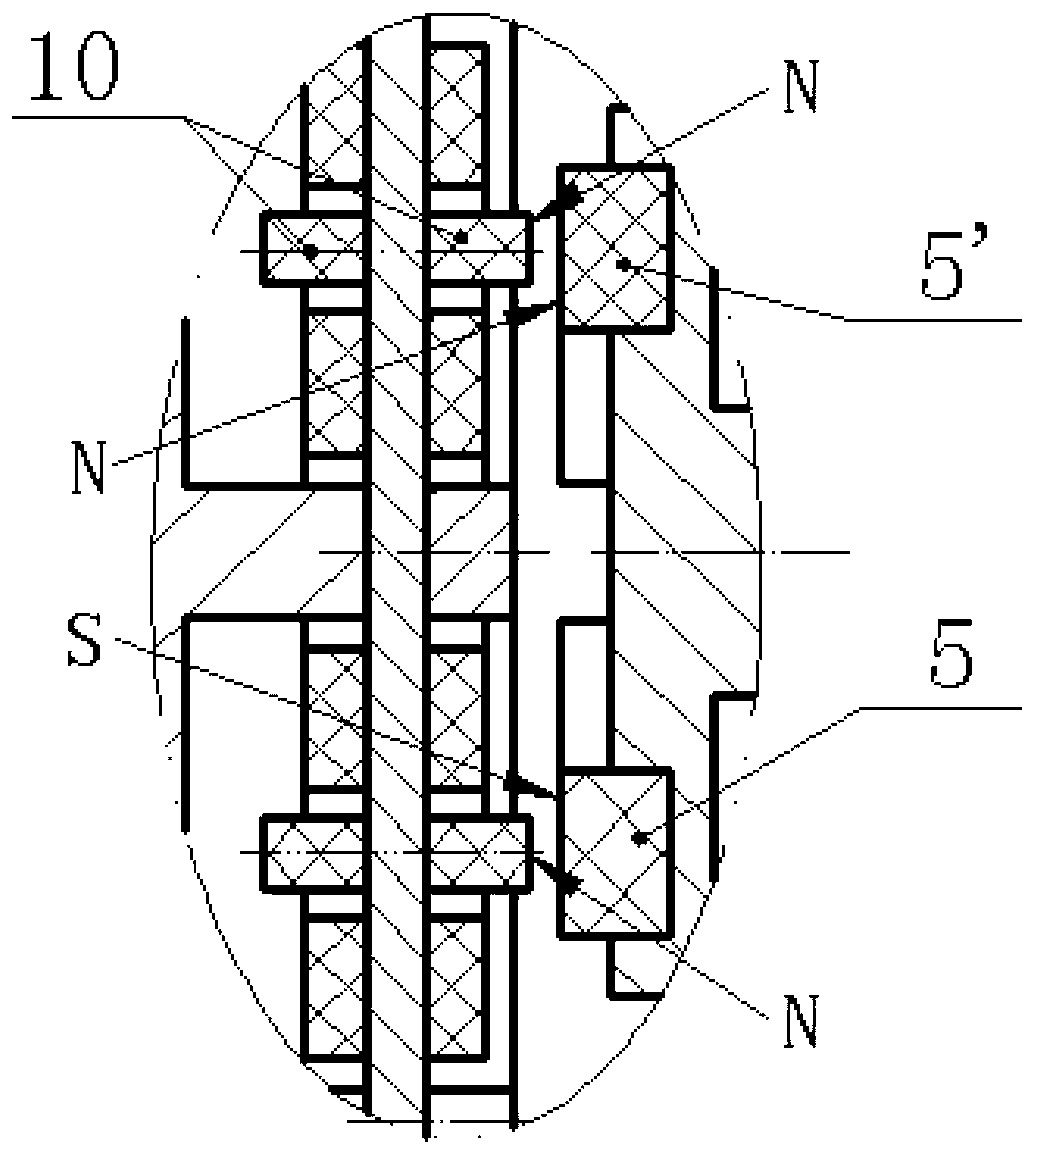 Piezoelectric power-generation device for supplying power for rail vehicle bearing monitoring system